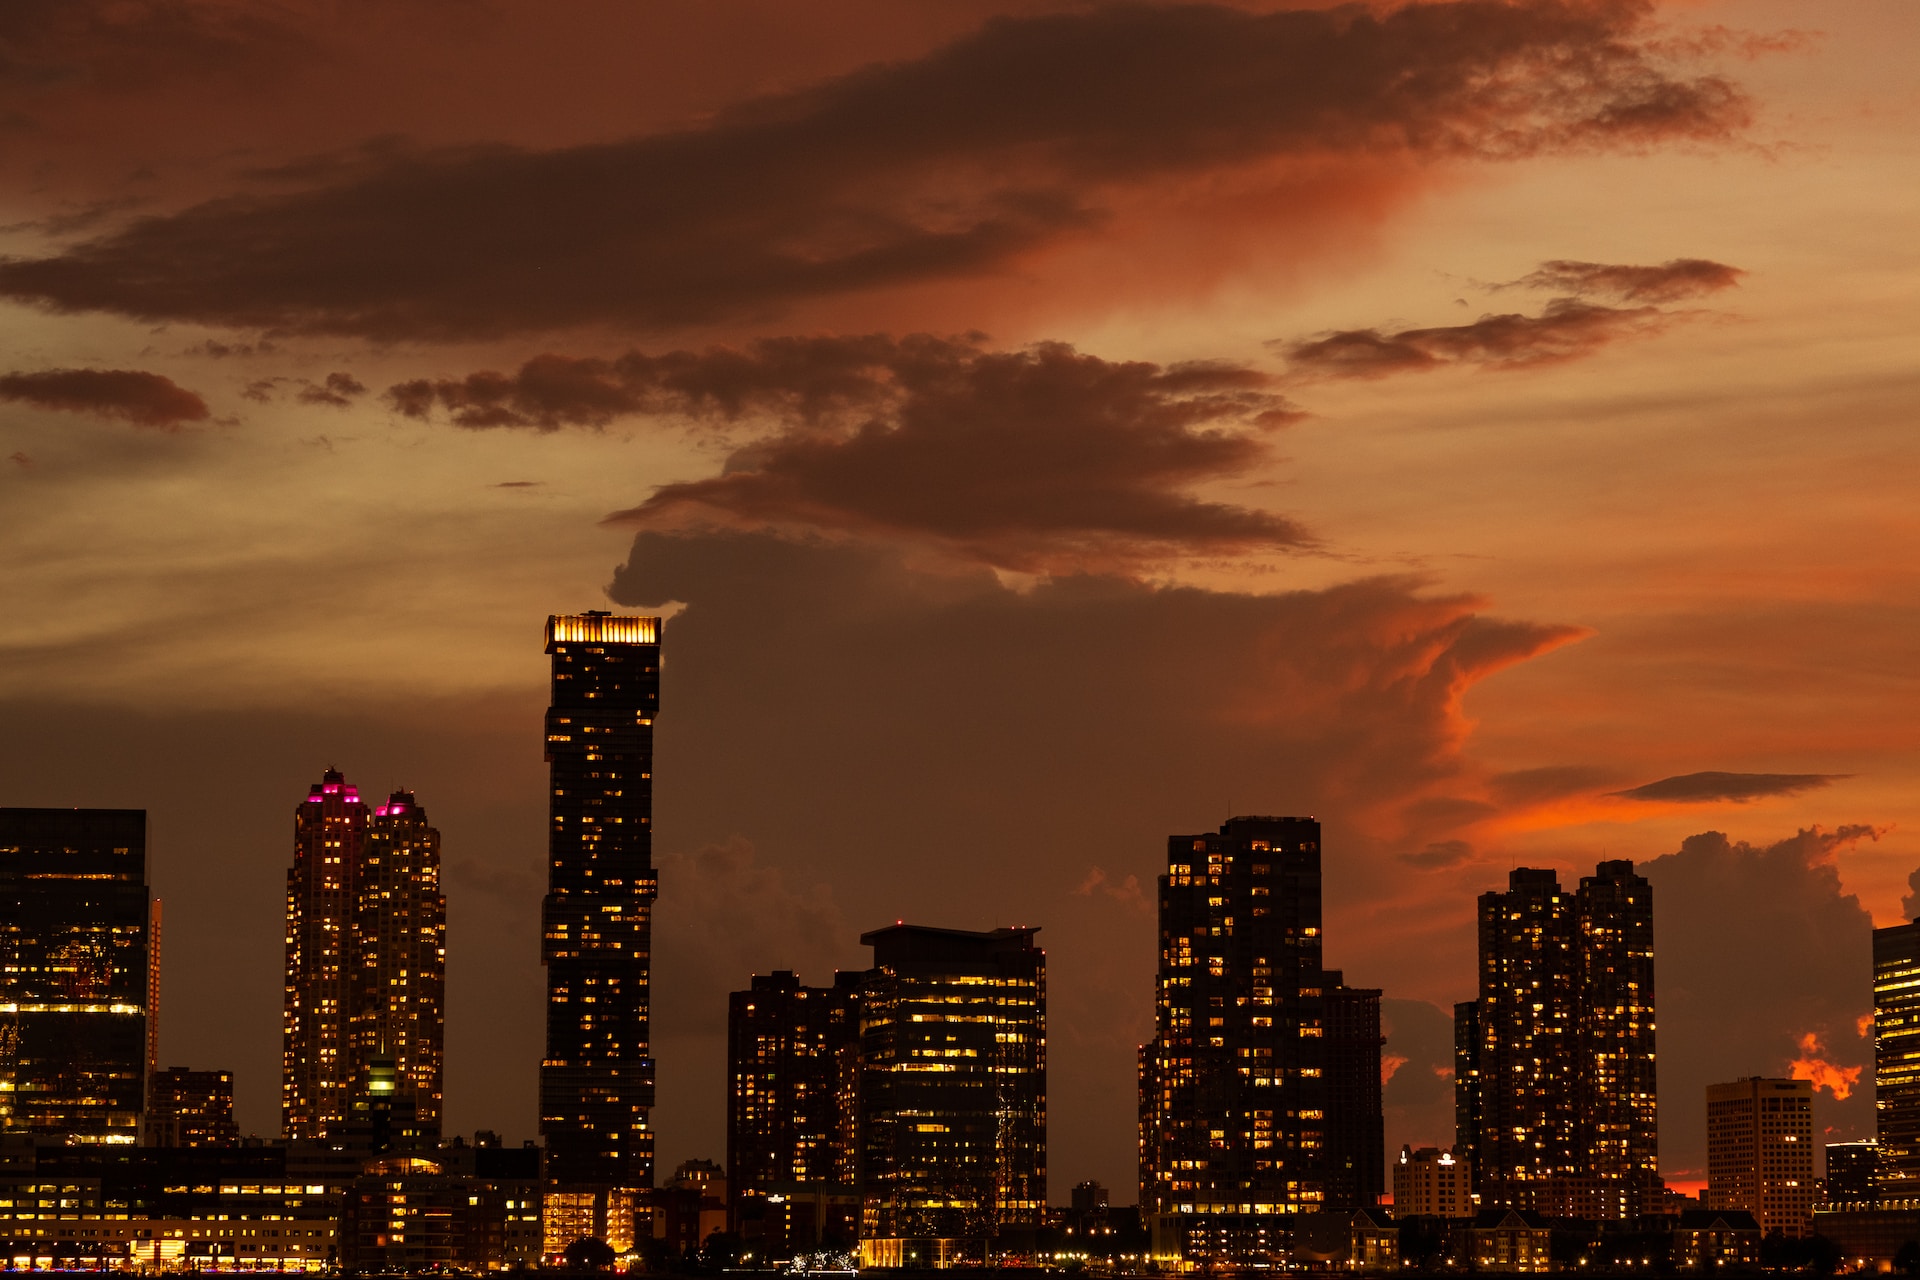 A North American Trade region with a city skyline at dusk.